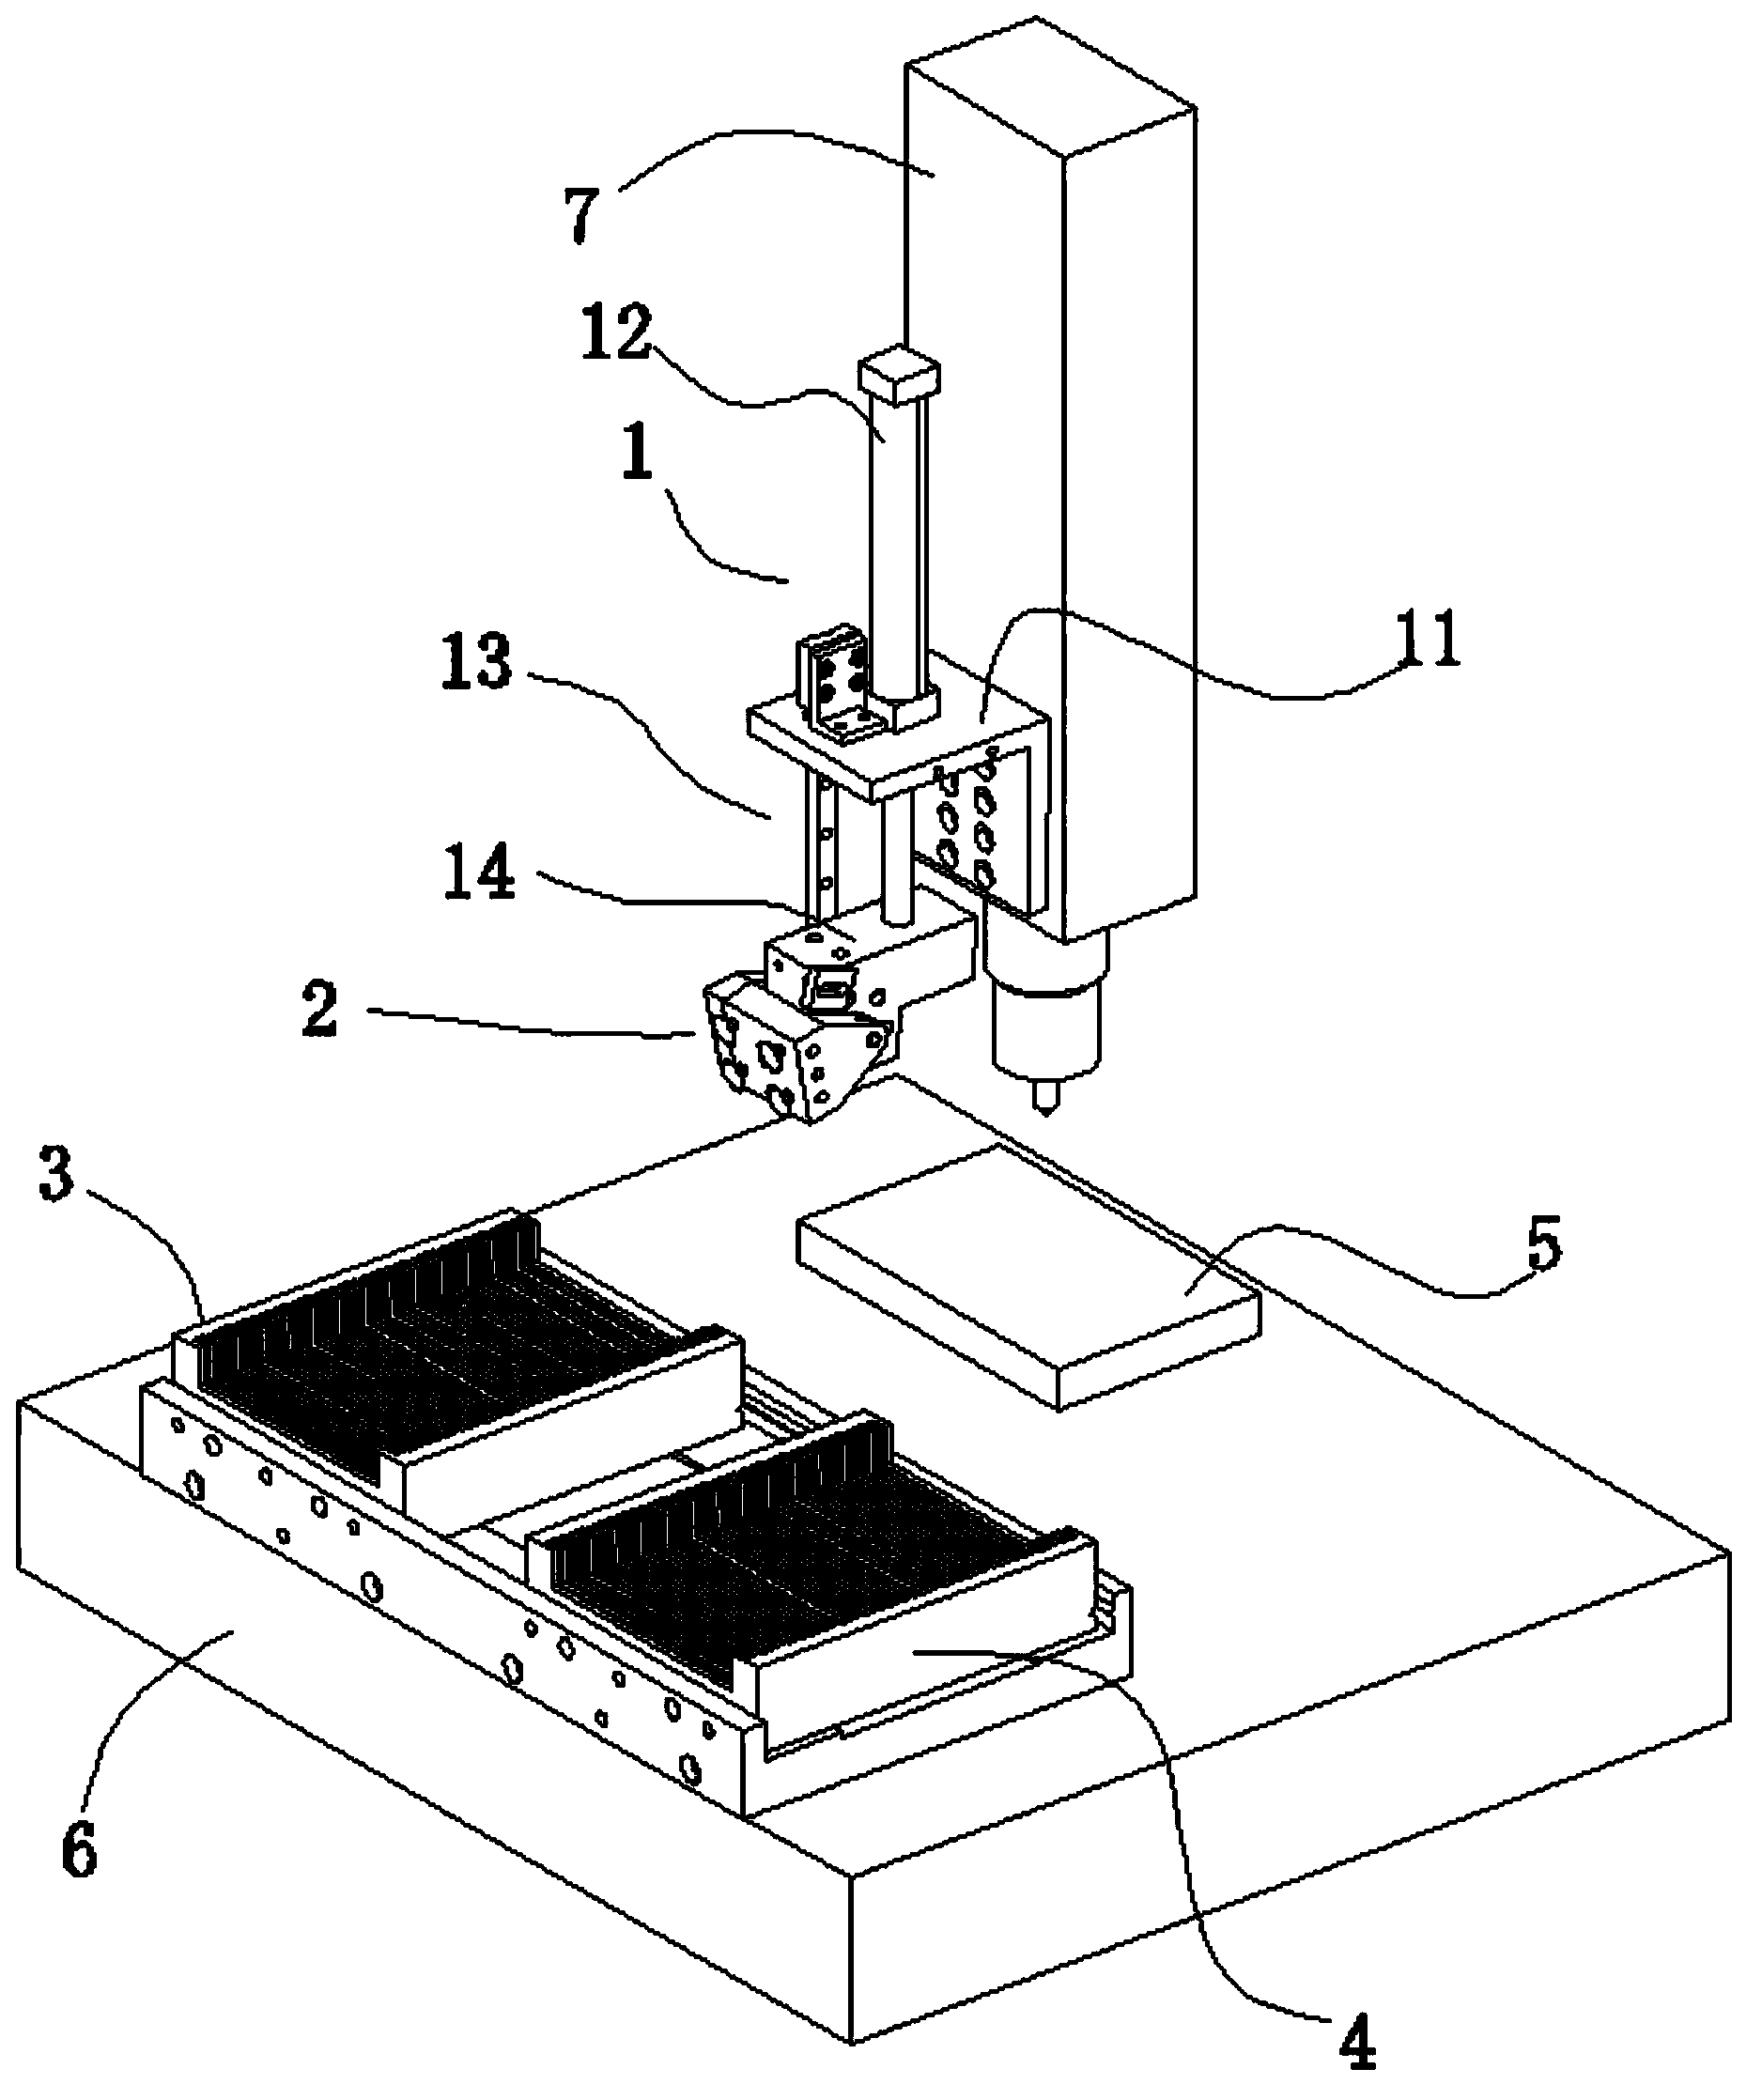 Automatic feeding and blanking mechanism for lens grinder